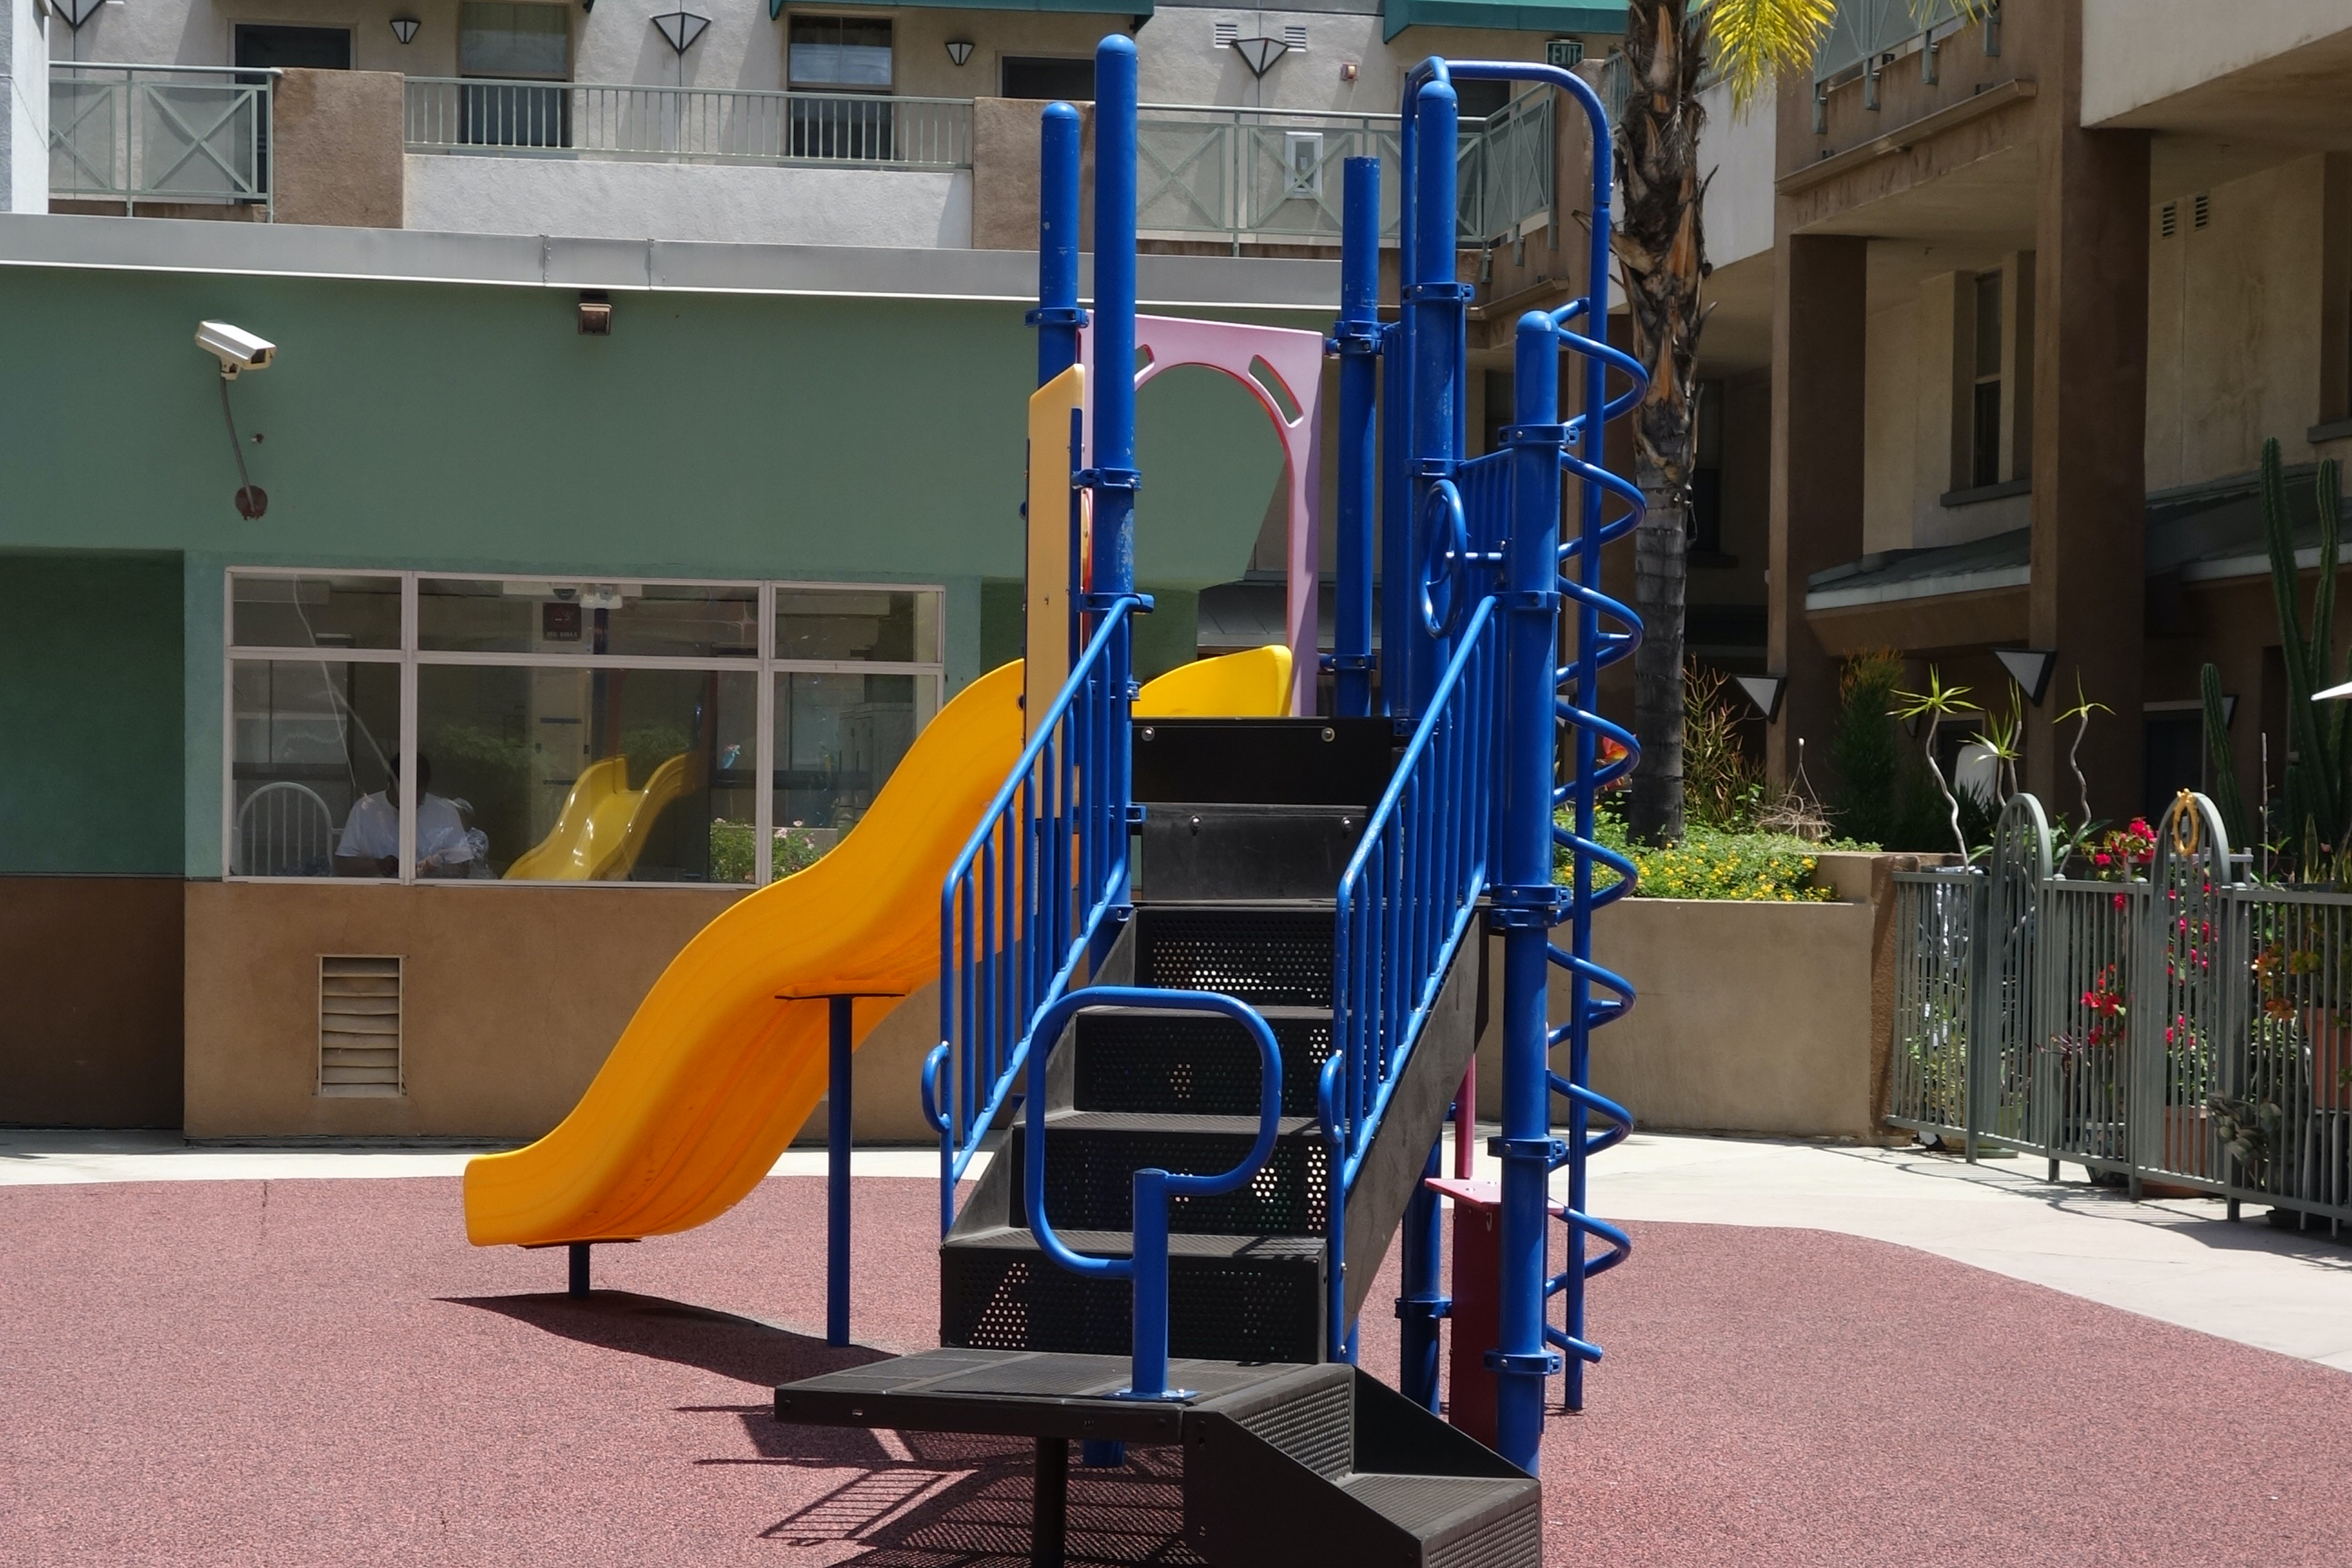 A close up view of a playground at Hope Village